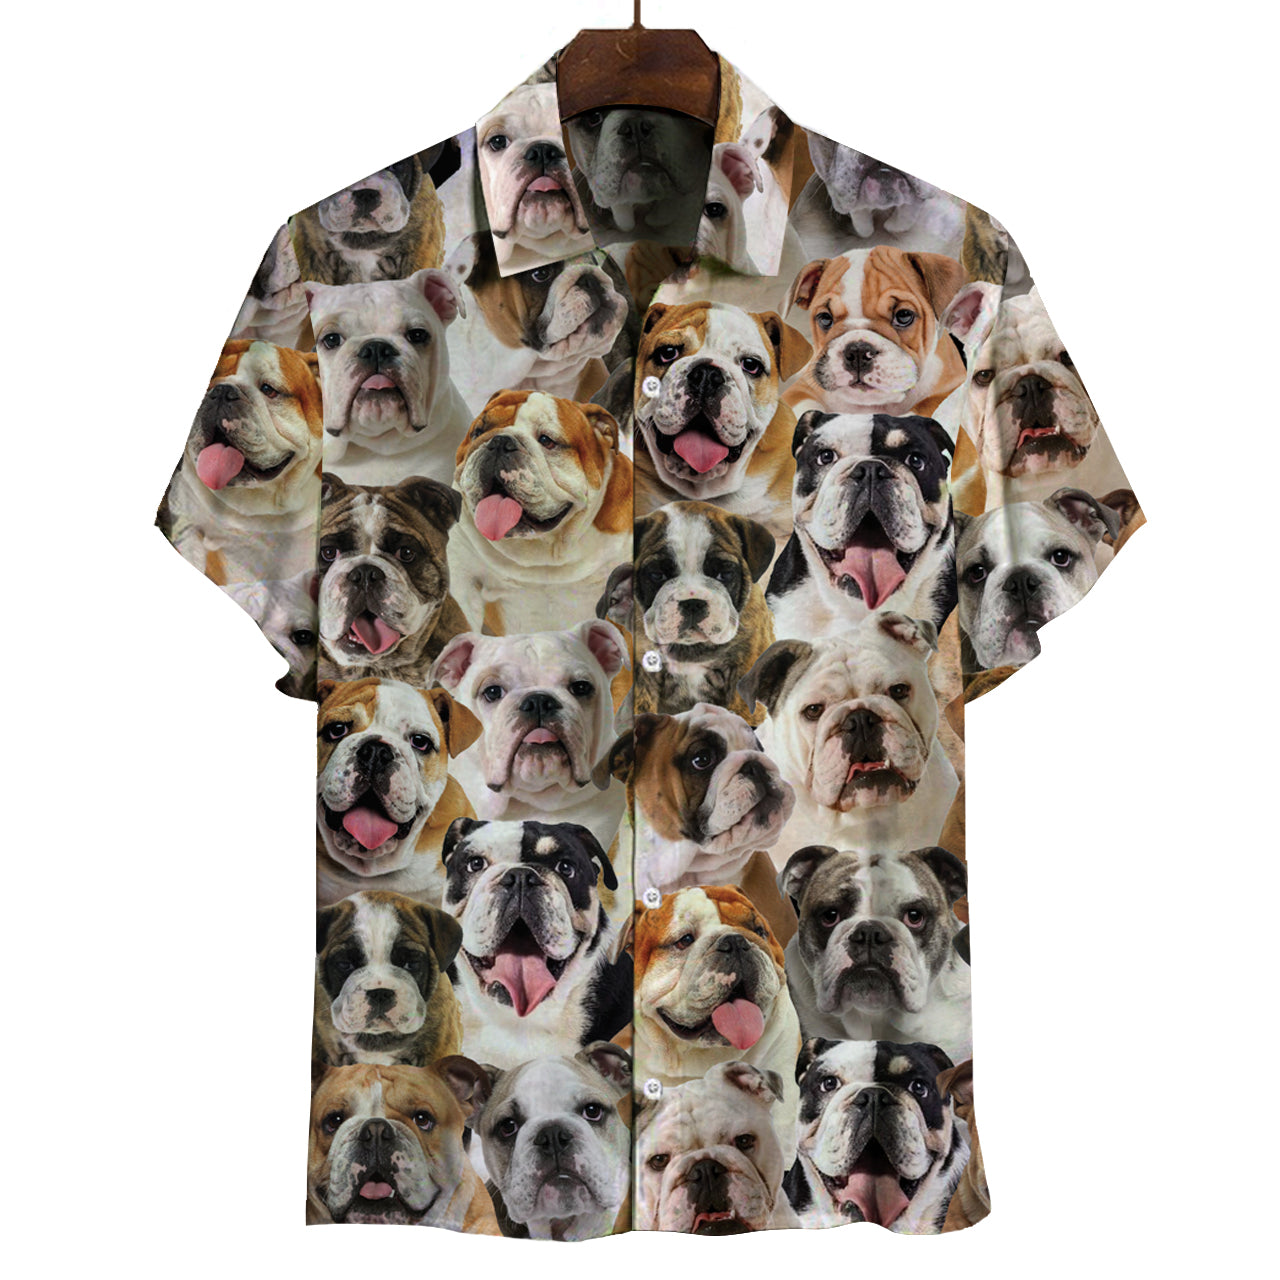 You Will Have A Bunch Of English Bulldogs - Shirt V1